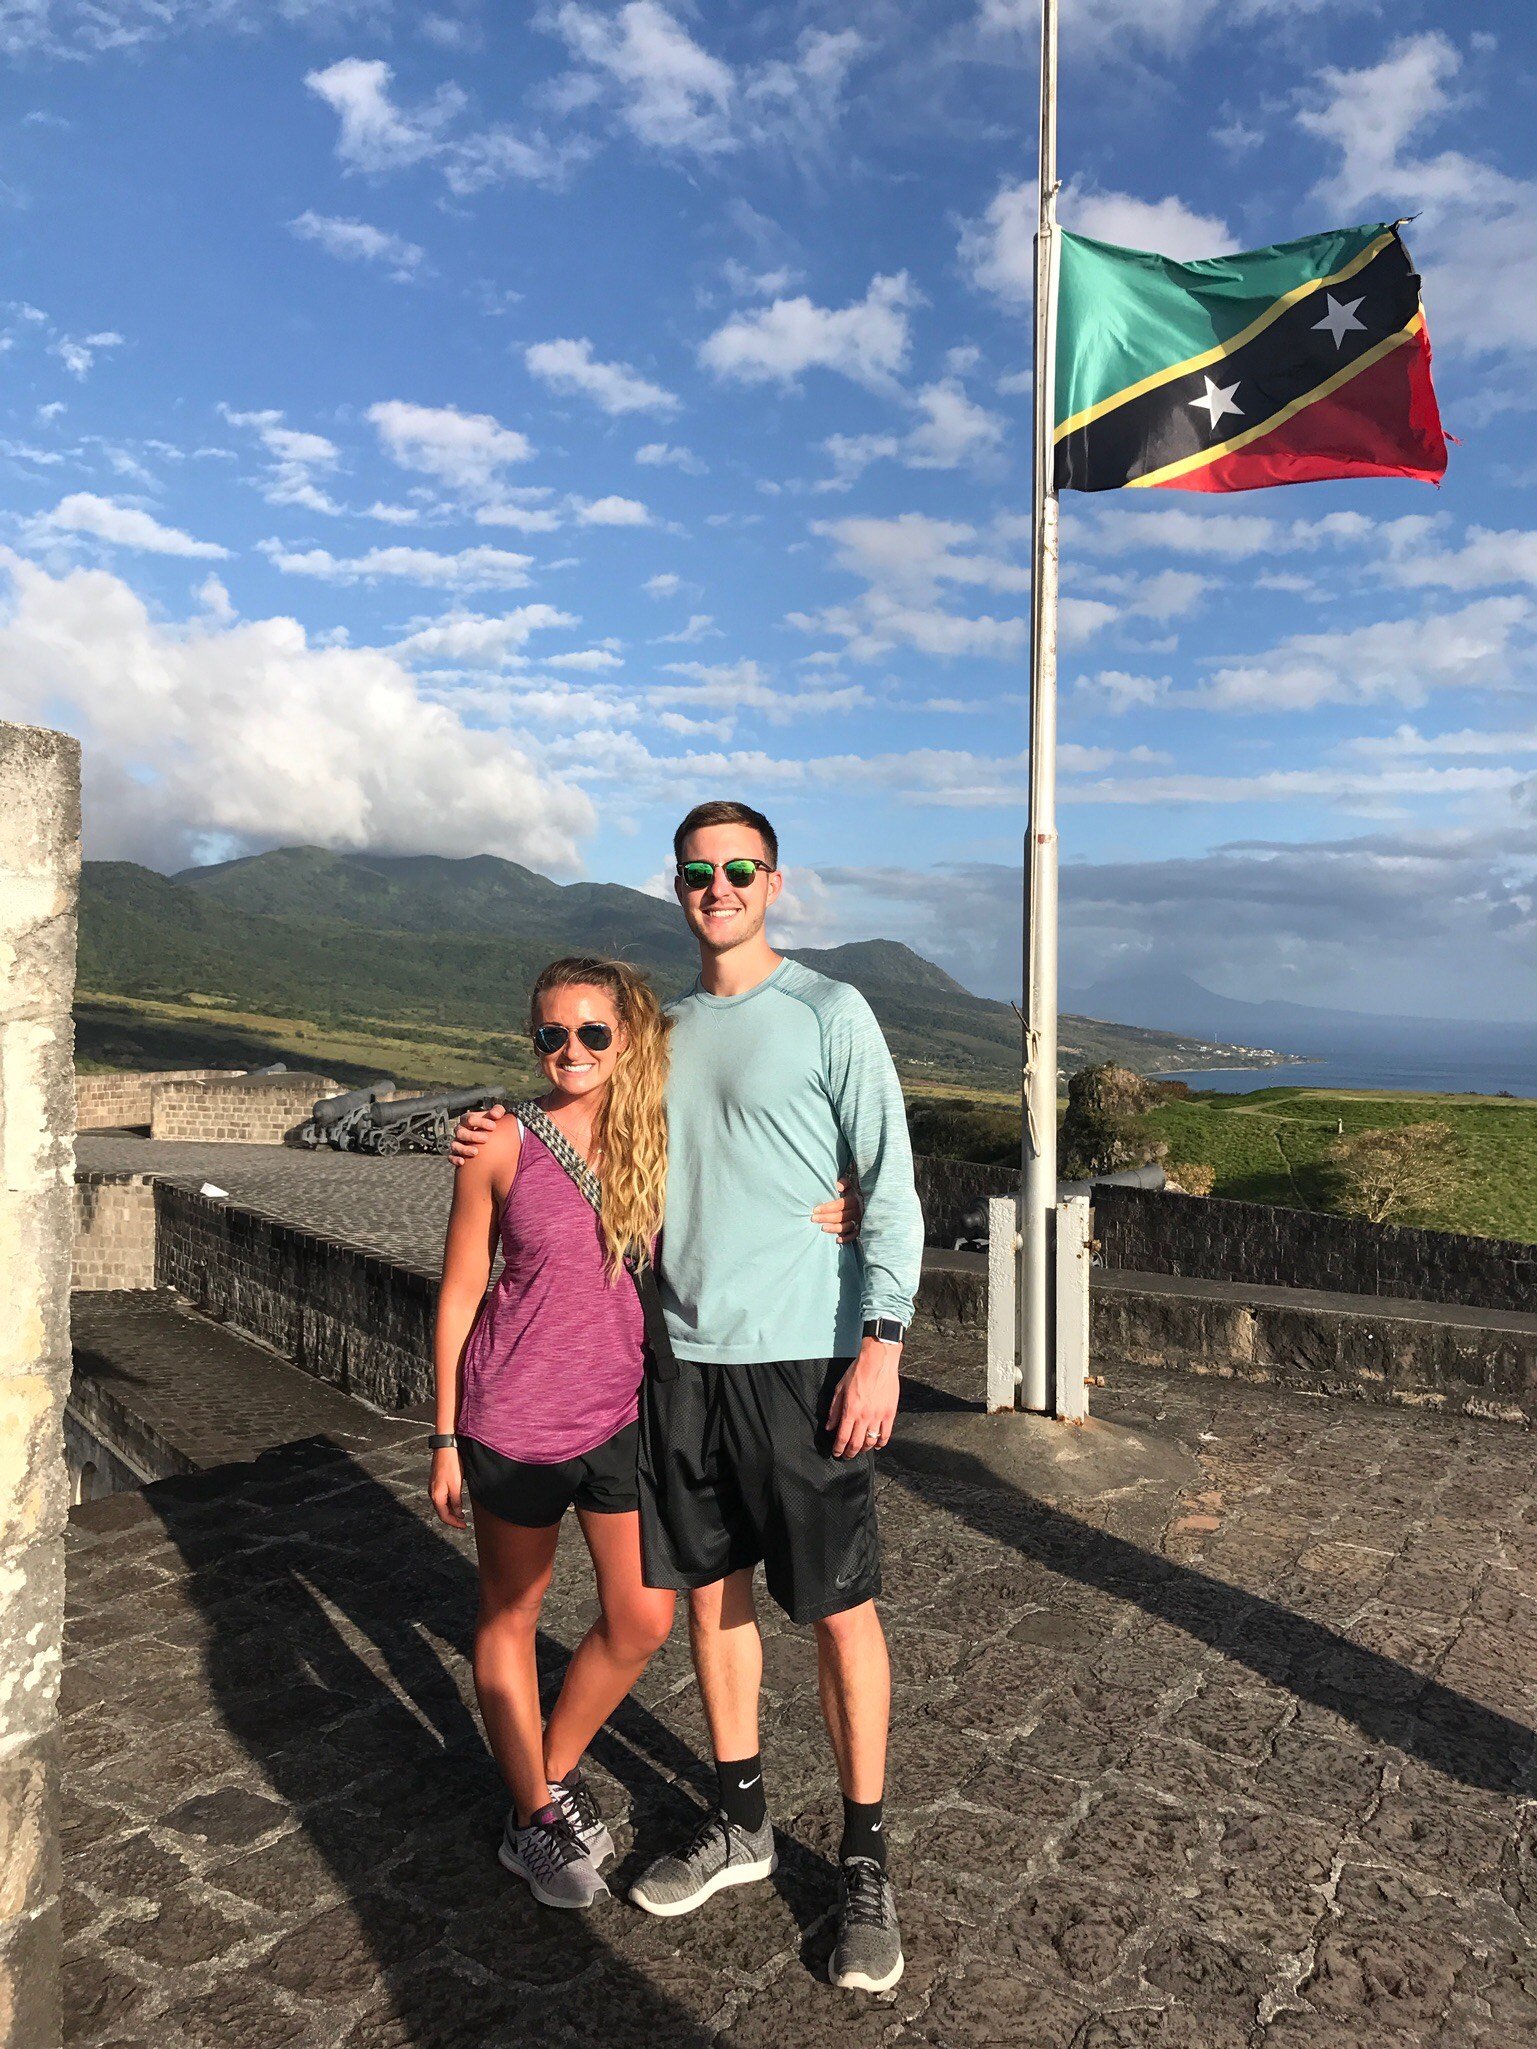 Grant and wife St Kitts flag